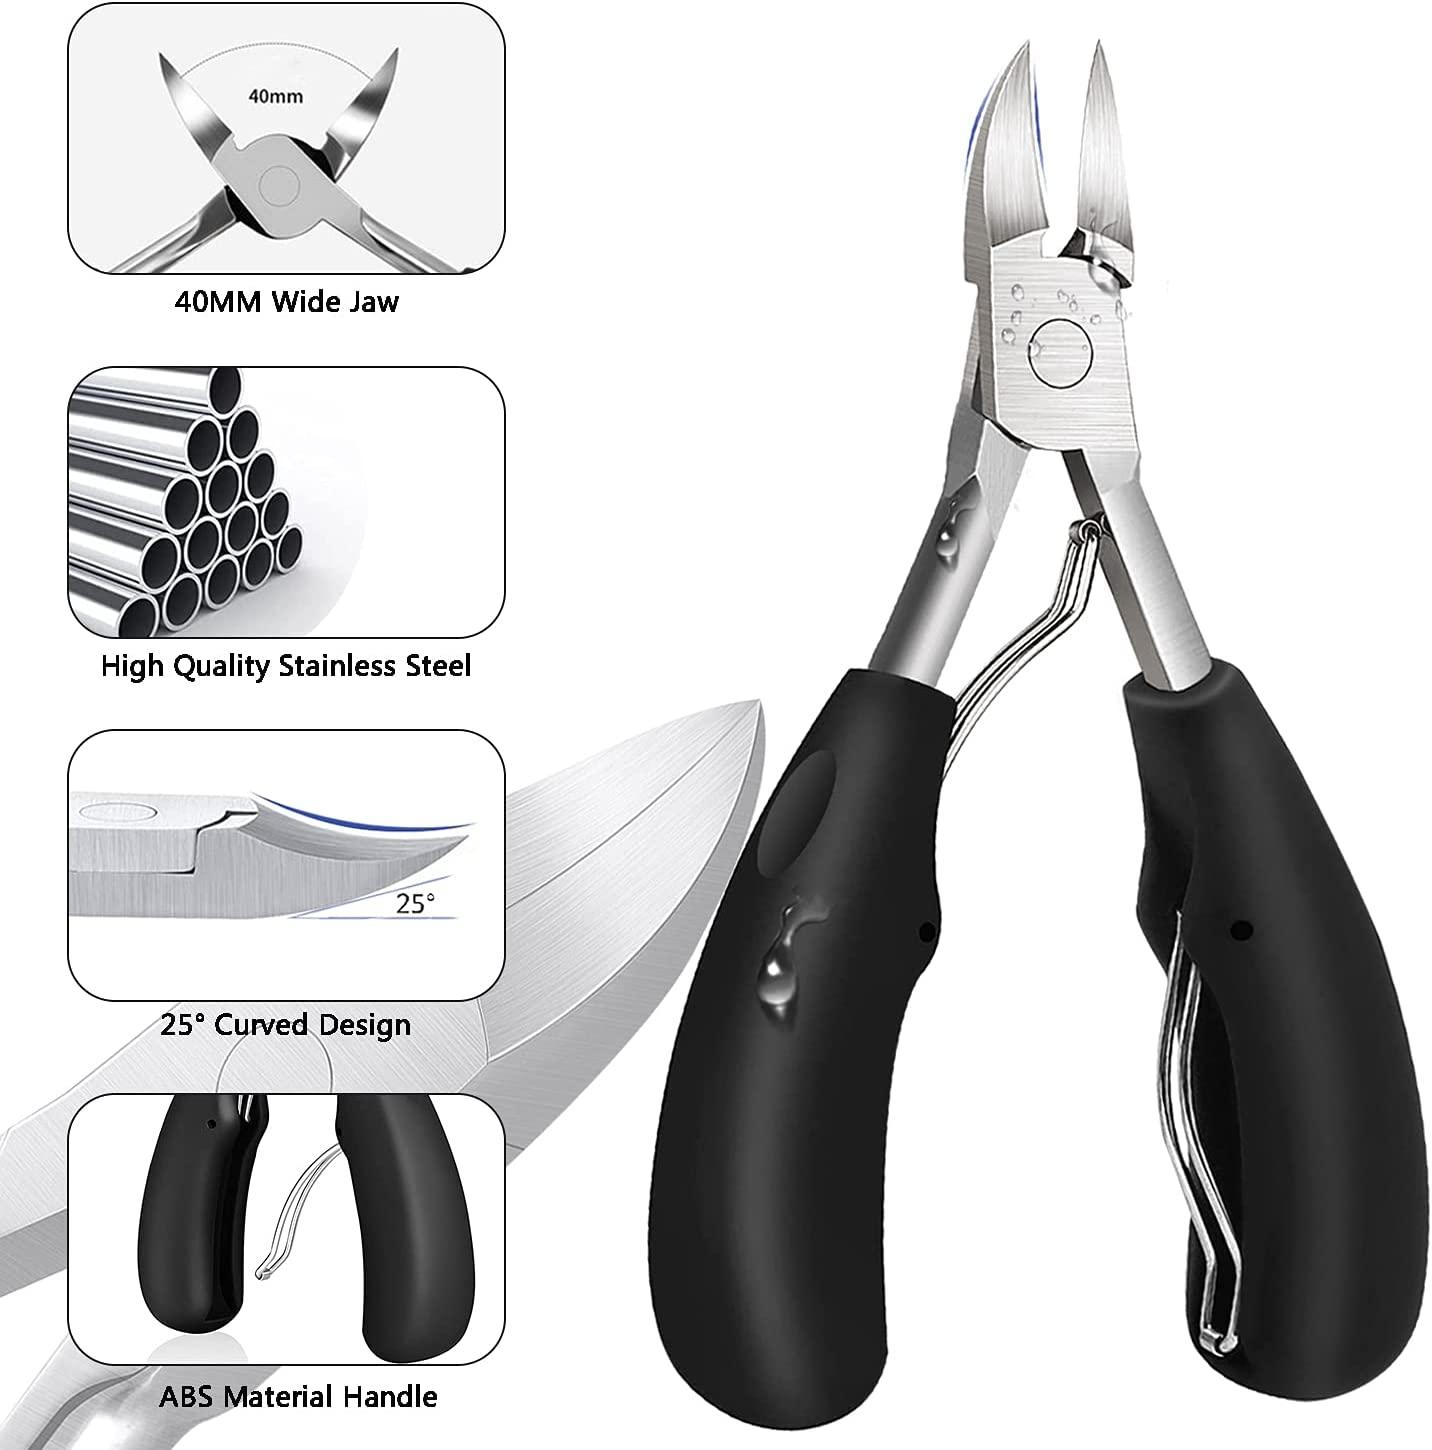 Bezox Toenail Clippers, Nail Clippers for Thick Toenail and Ingrown Nails - Heavy Duty Toenail Nippers, Long Handled Toe Nail Clipper - w/Metal